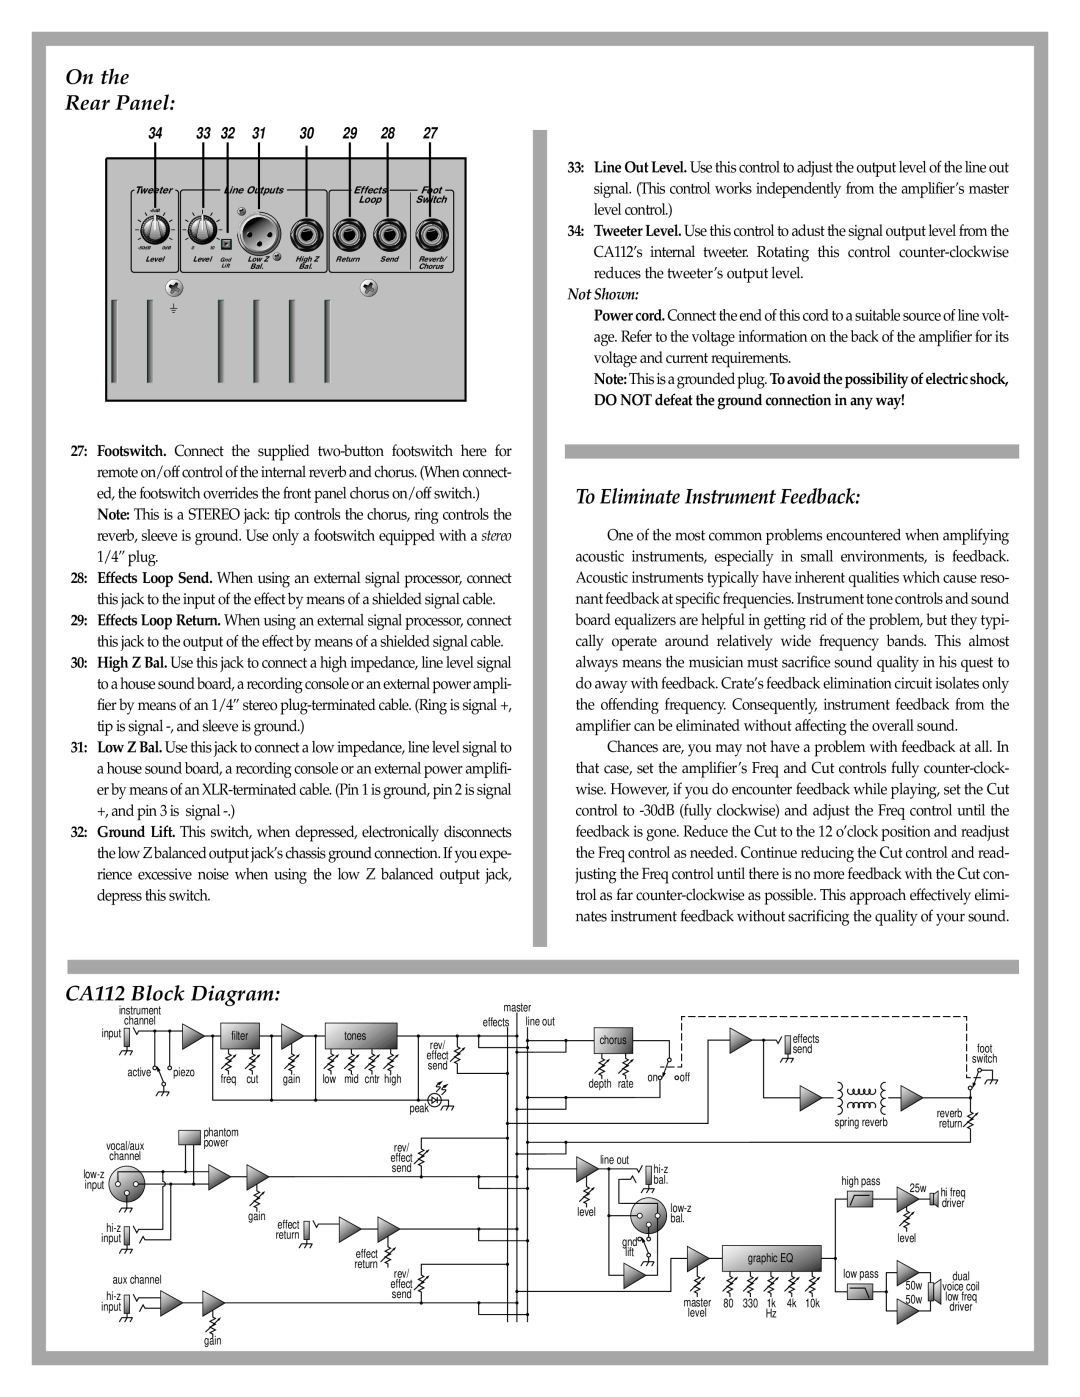 Crate Amplifiers manual On the Rear Panel, To Eliminate Instrument Feedback, CA112 Block Diagram, Not Shown 